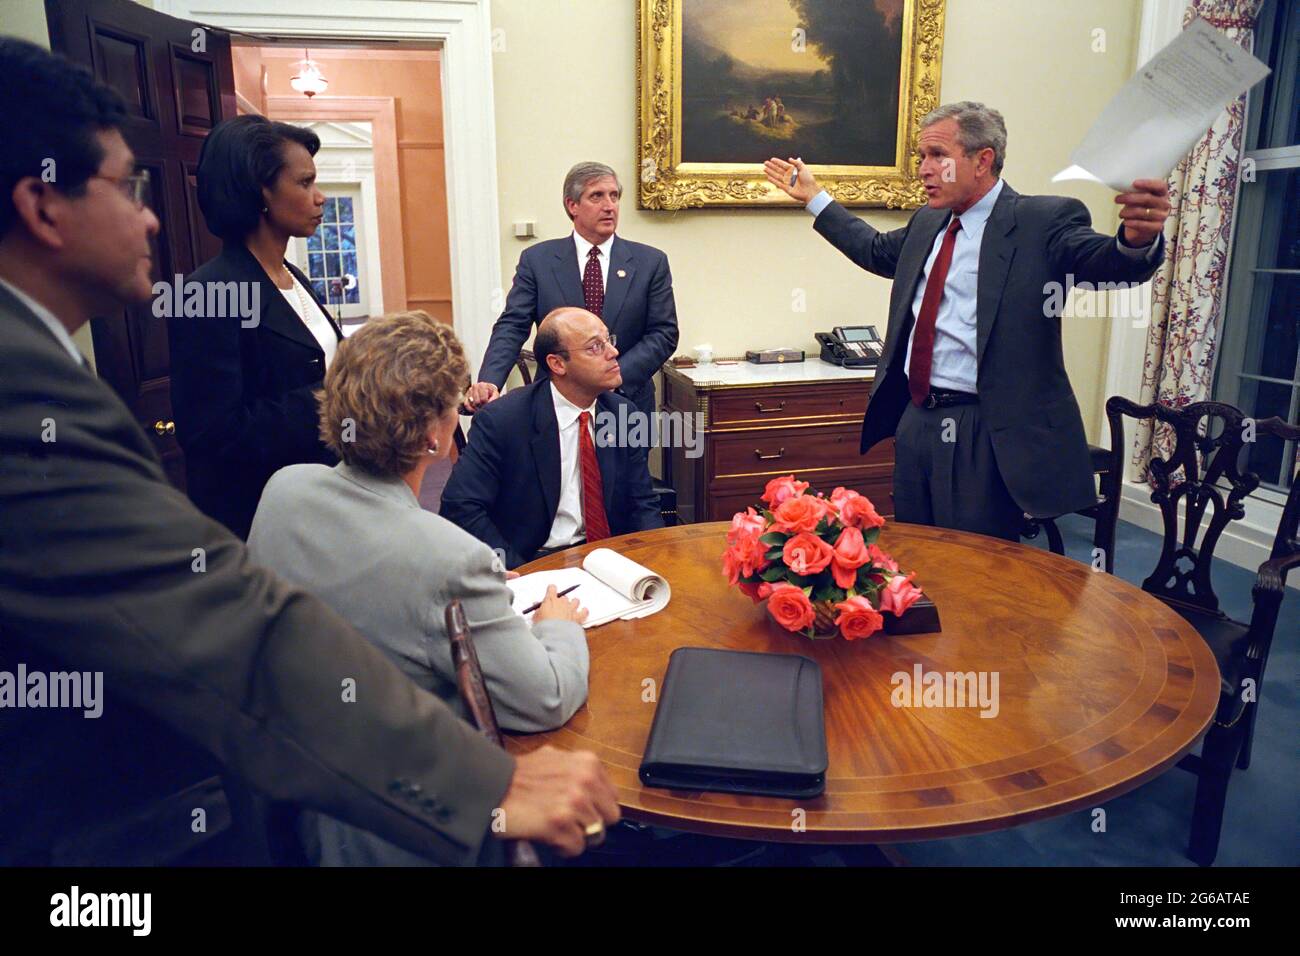 Working with his senior staff, President George W. Bush reviews the speech that he will deliver to the nation the evening of Tuesday, Sept. 11, 2001, from the Oval Office. Pictured from left are: Alberto Gonzales, White House Counsel; Condoleezza Rice, National Security Adviser; Karen Hughes, Counselor; Ari Fleischer, Press Secretary, and Andy Card, Chief of Staff.  Photo by Paul Morse, The White House. Stock Photo